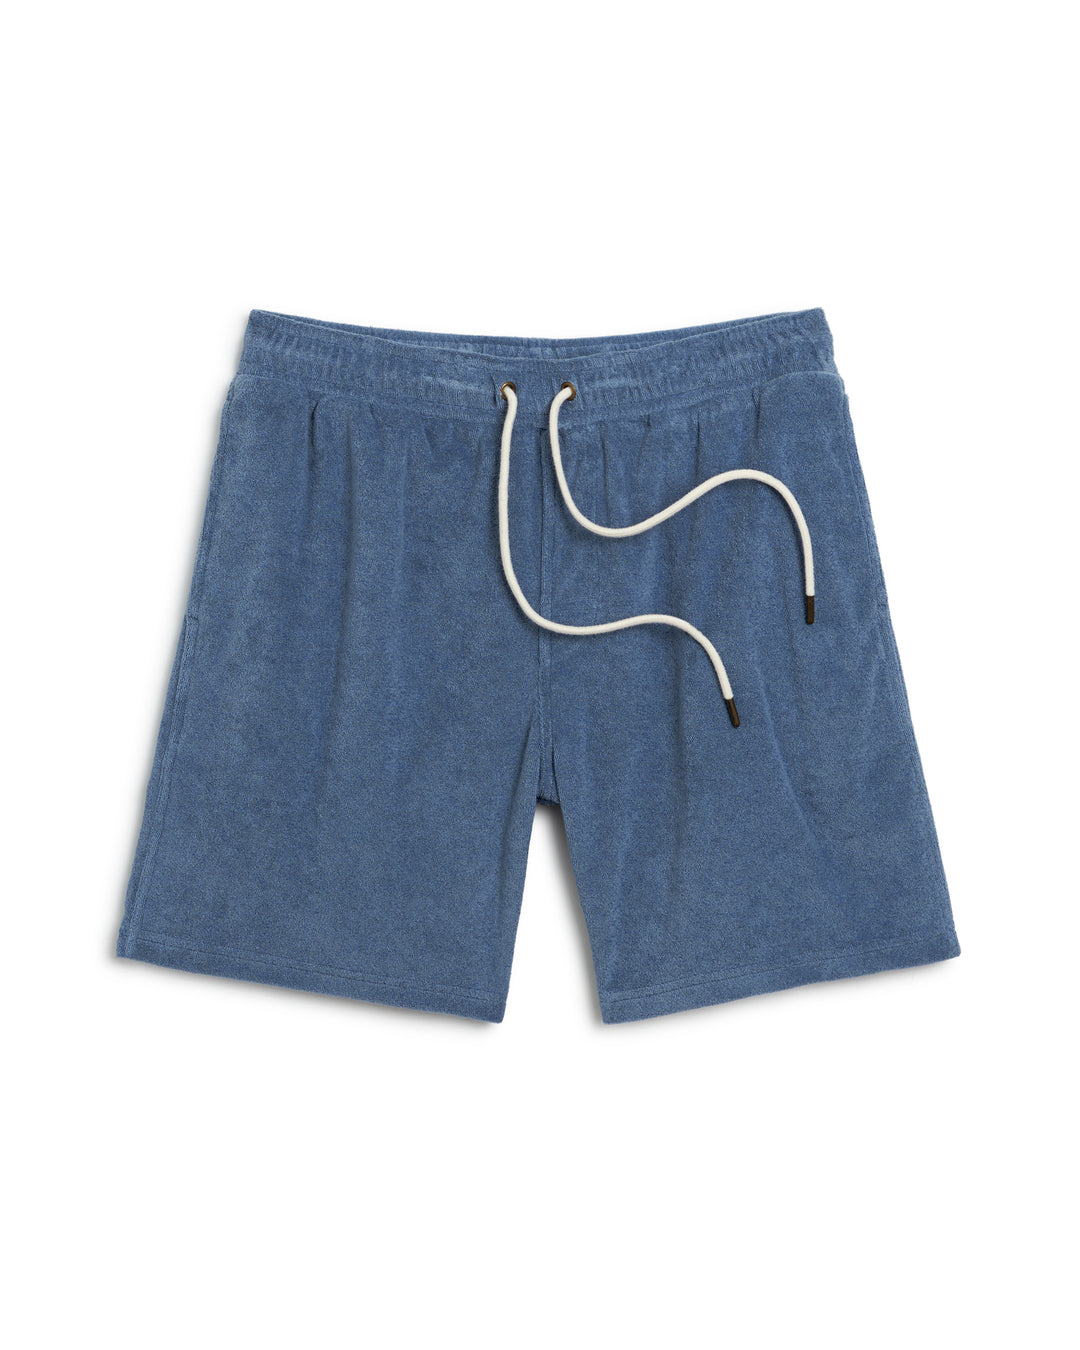 The Dandy Del Mar Tropez Short - Annapolis swim shorts imported from California.